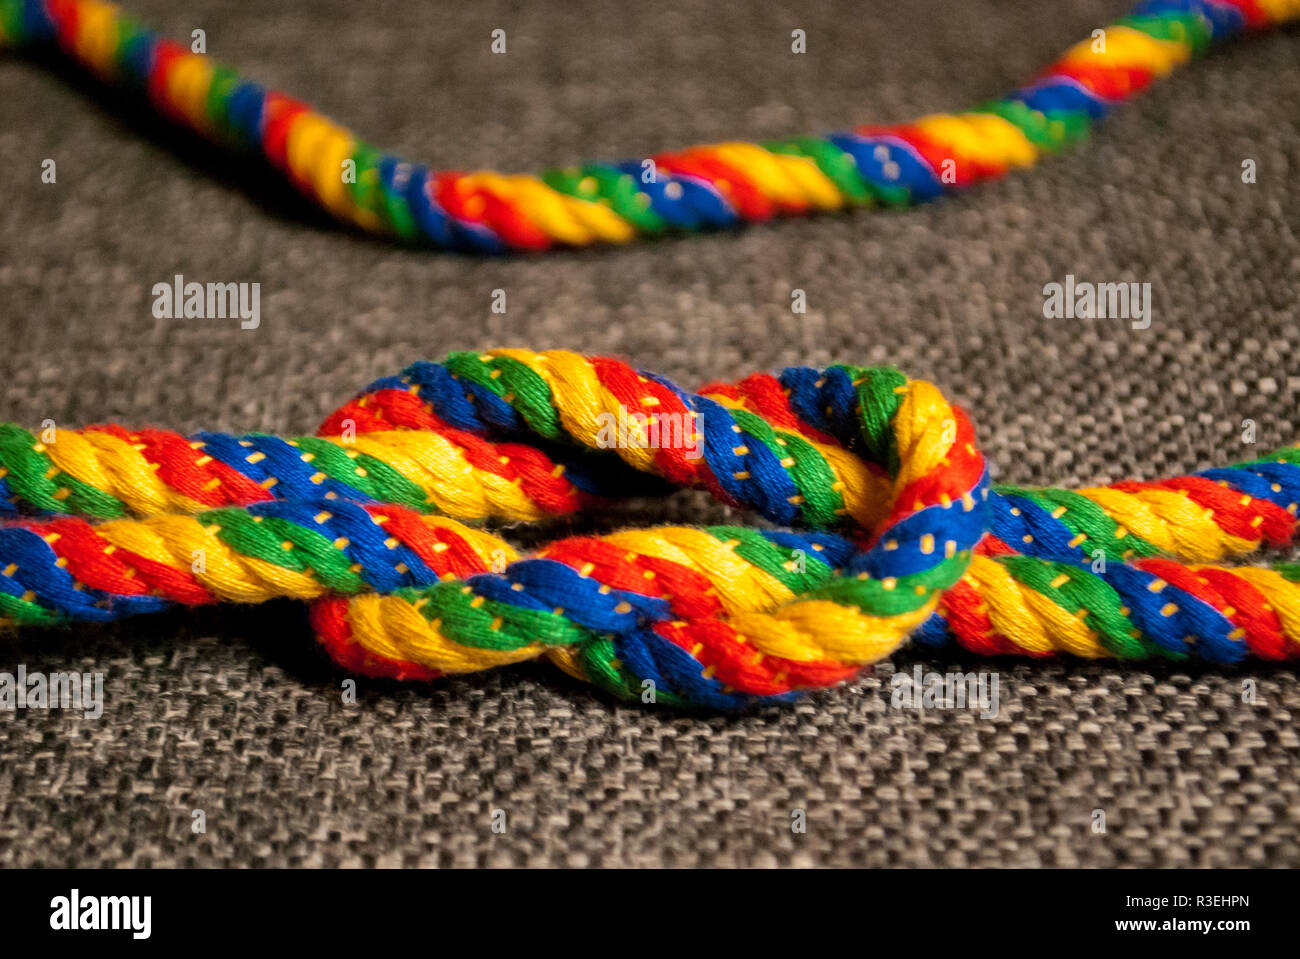 https://c8.alamy.com/comp/R3EHPN/a-rainbow-colored-rope-tied-into-a-reef-knot-R3EHPN.jpg